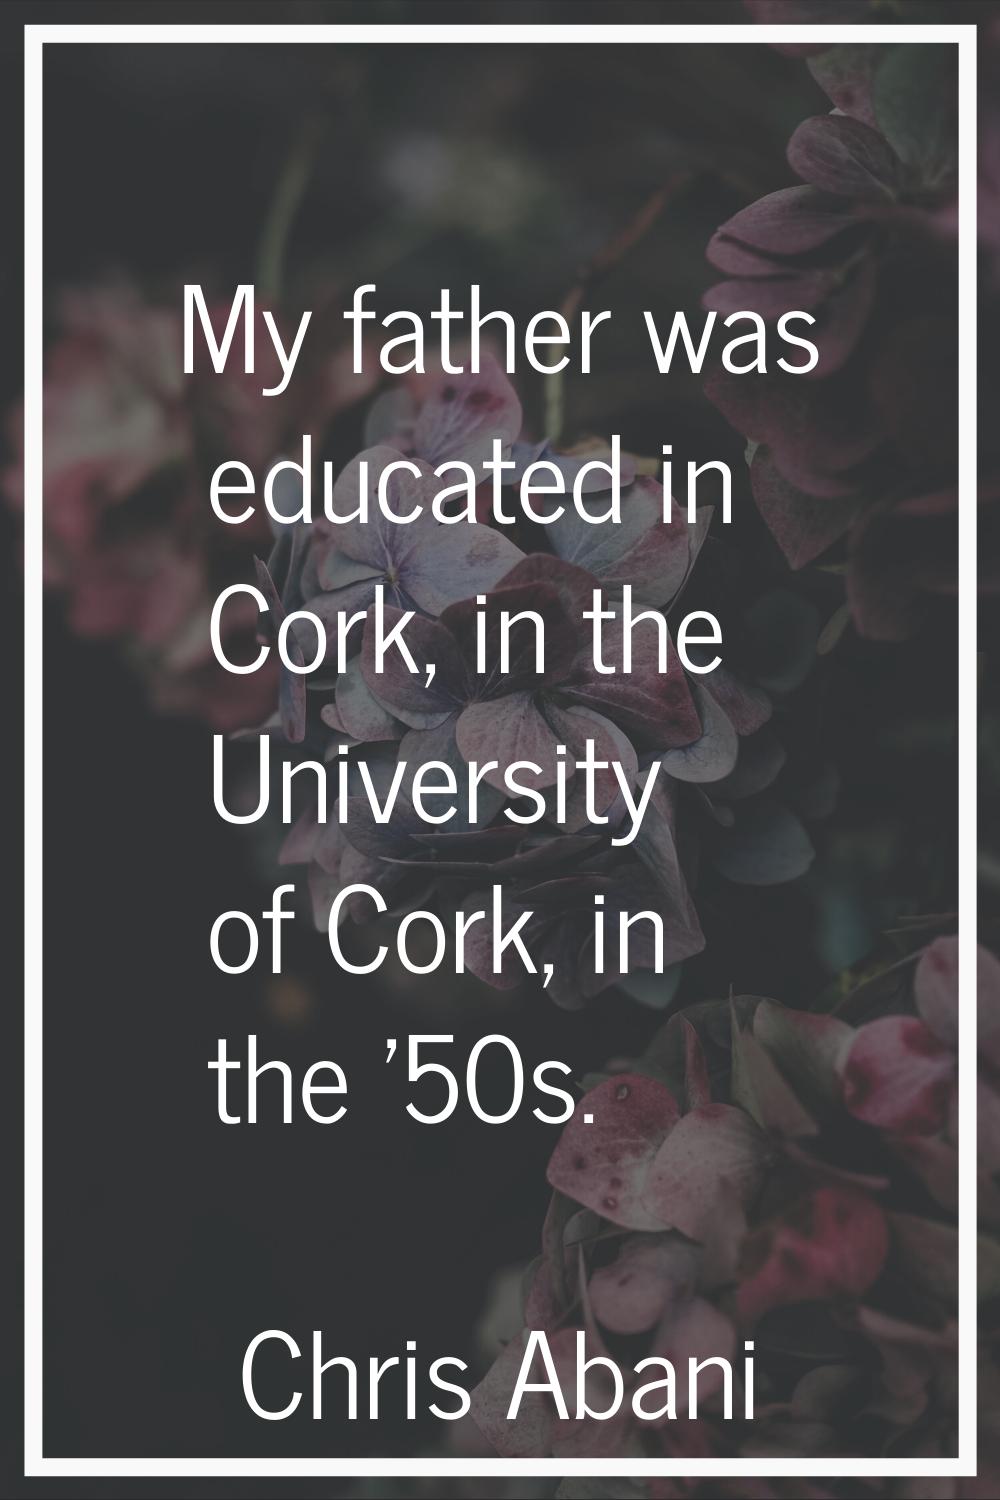 My father was educated in Cork, in the University of Cork, in the '50s.